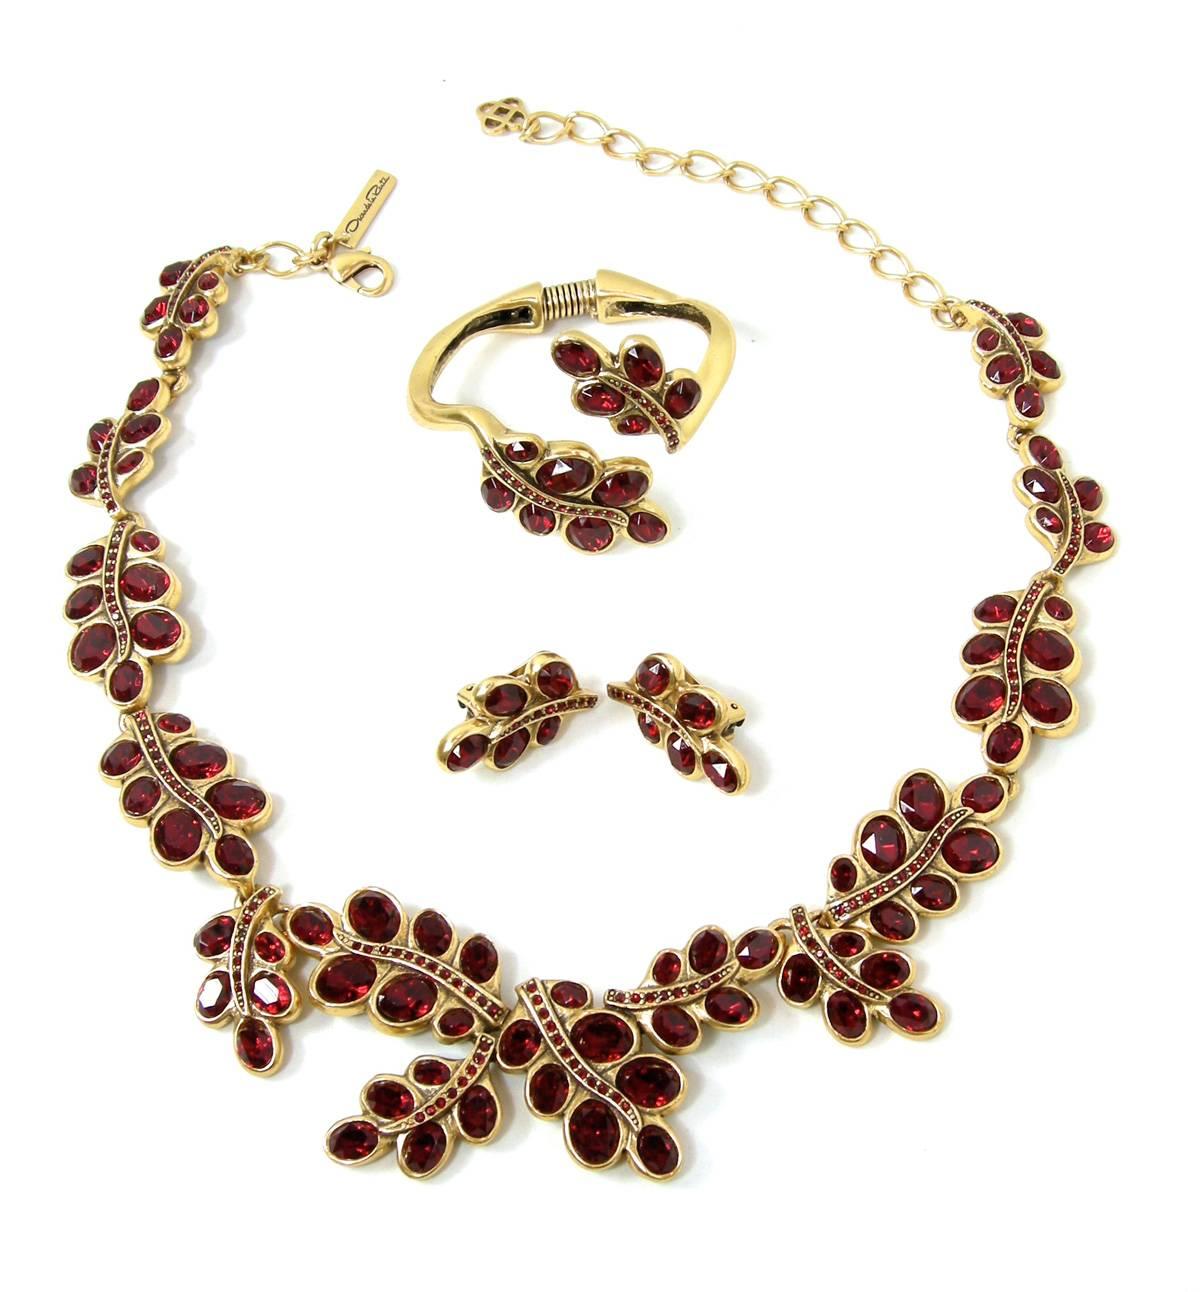 I have seldom come across a couture vintage Oscar de la Renta Parure.   The set is beautifully made and probably from the late 70s. The necklace has ruby red garnet color crystals and is 22-1/2” long. The center panel is almost 3’ wide and 1-1/2”